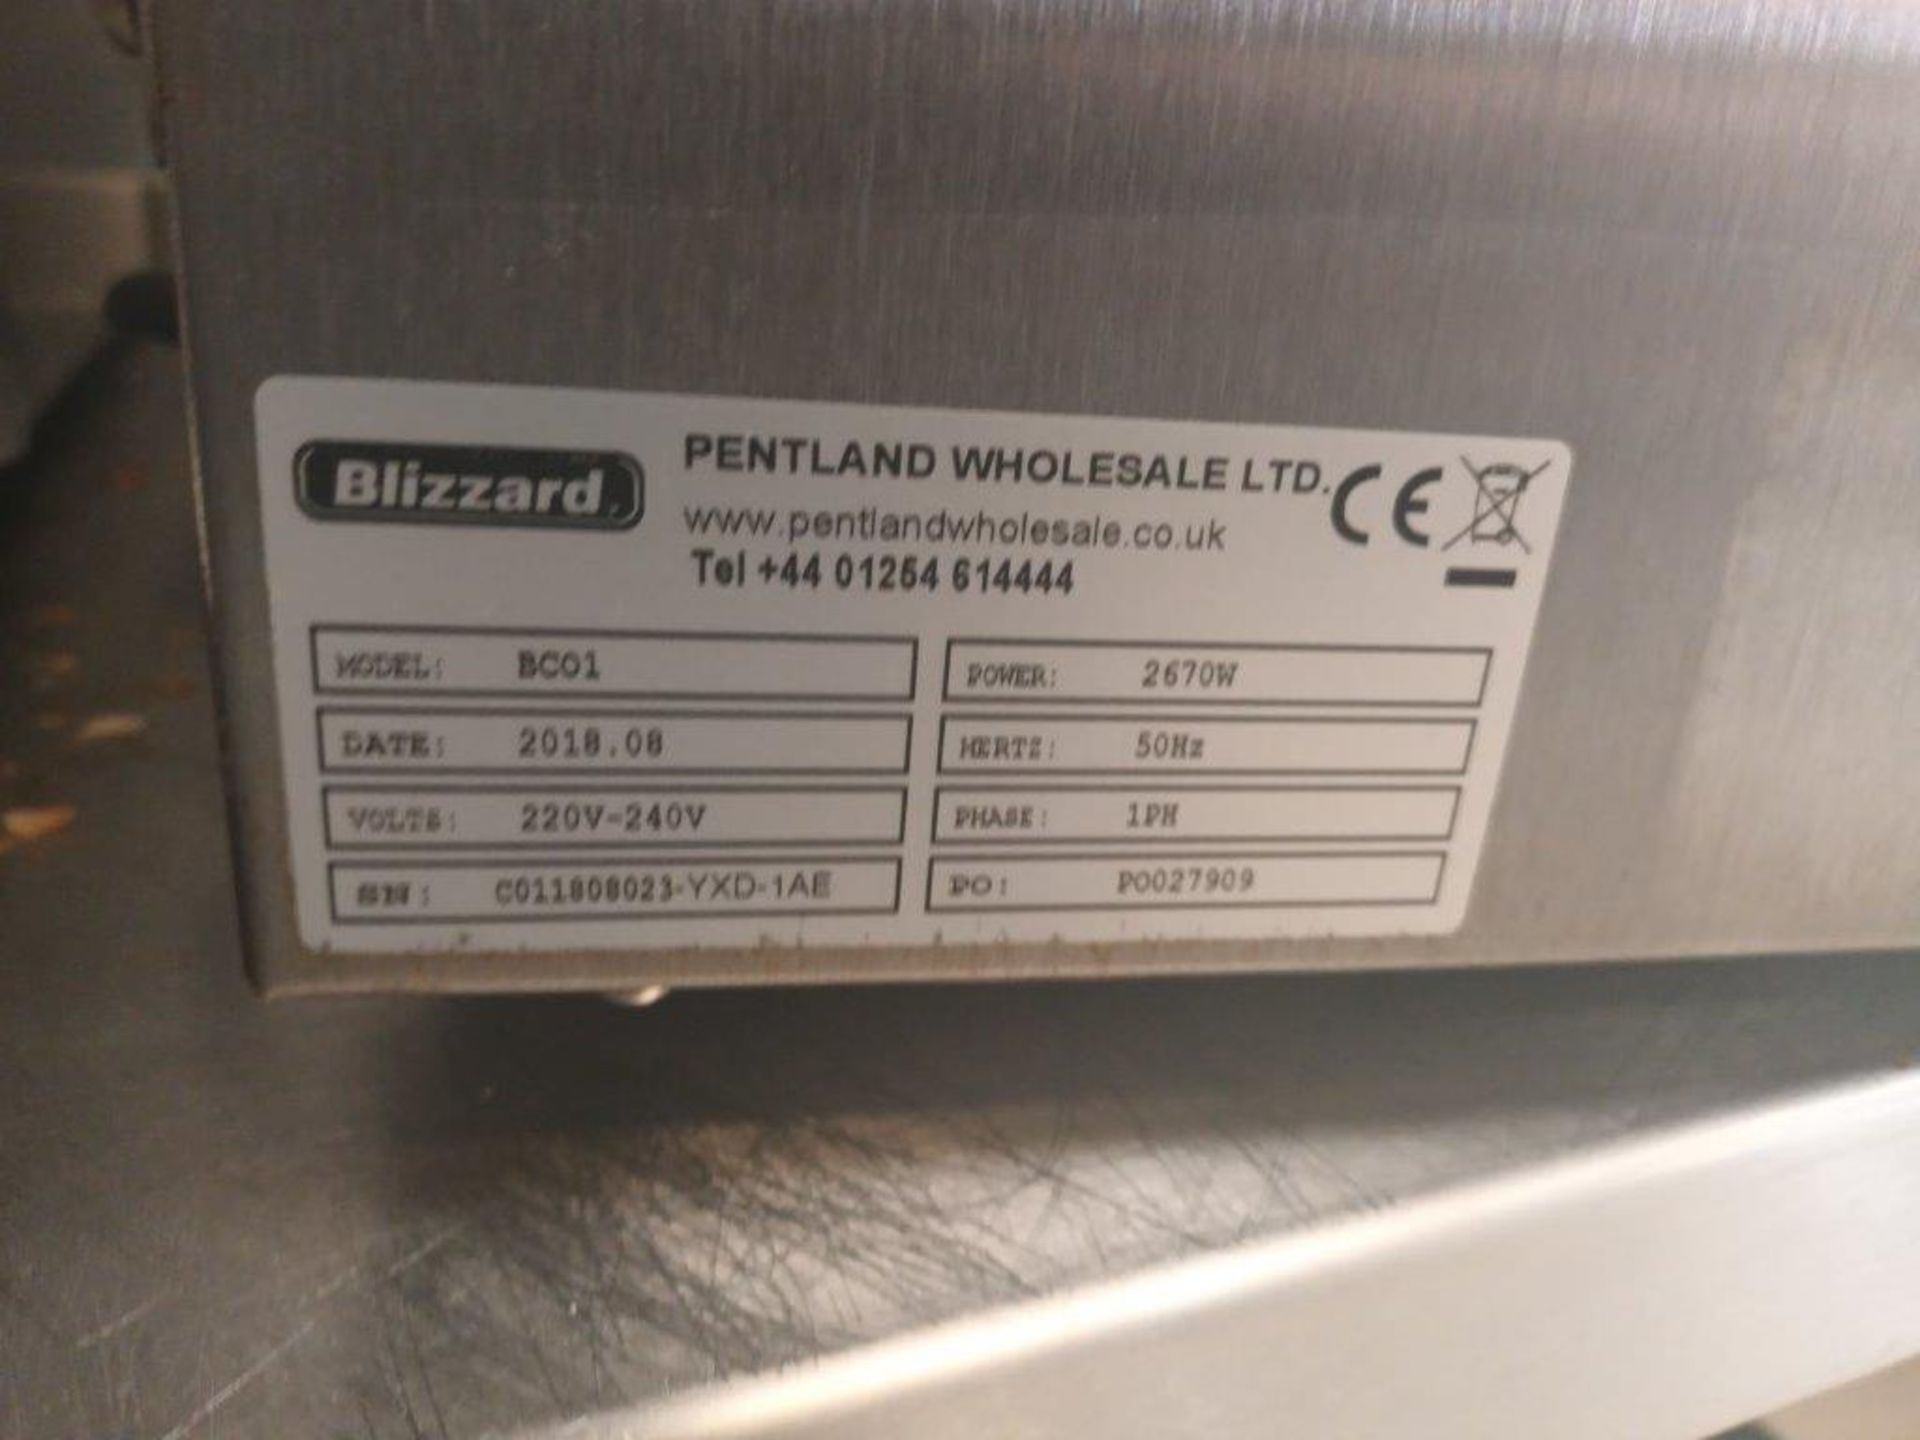 Blizzard BC01 commercial oven - Image 2 of 3